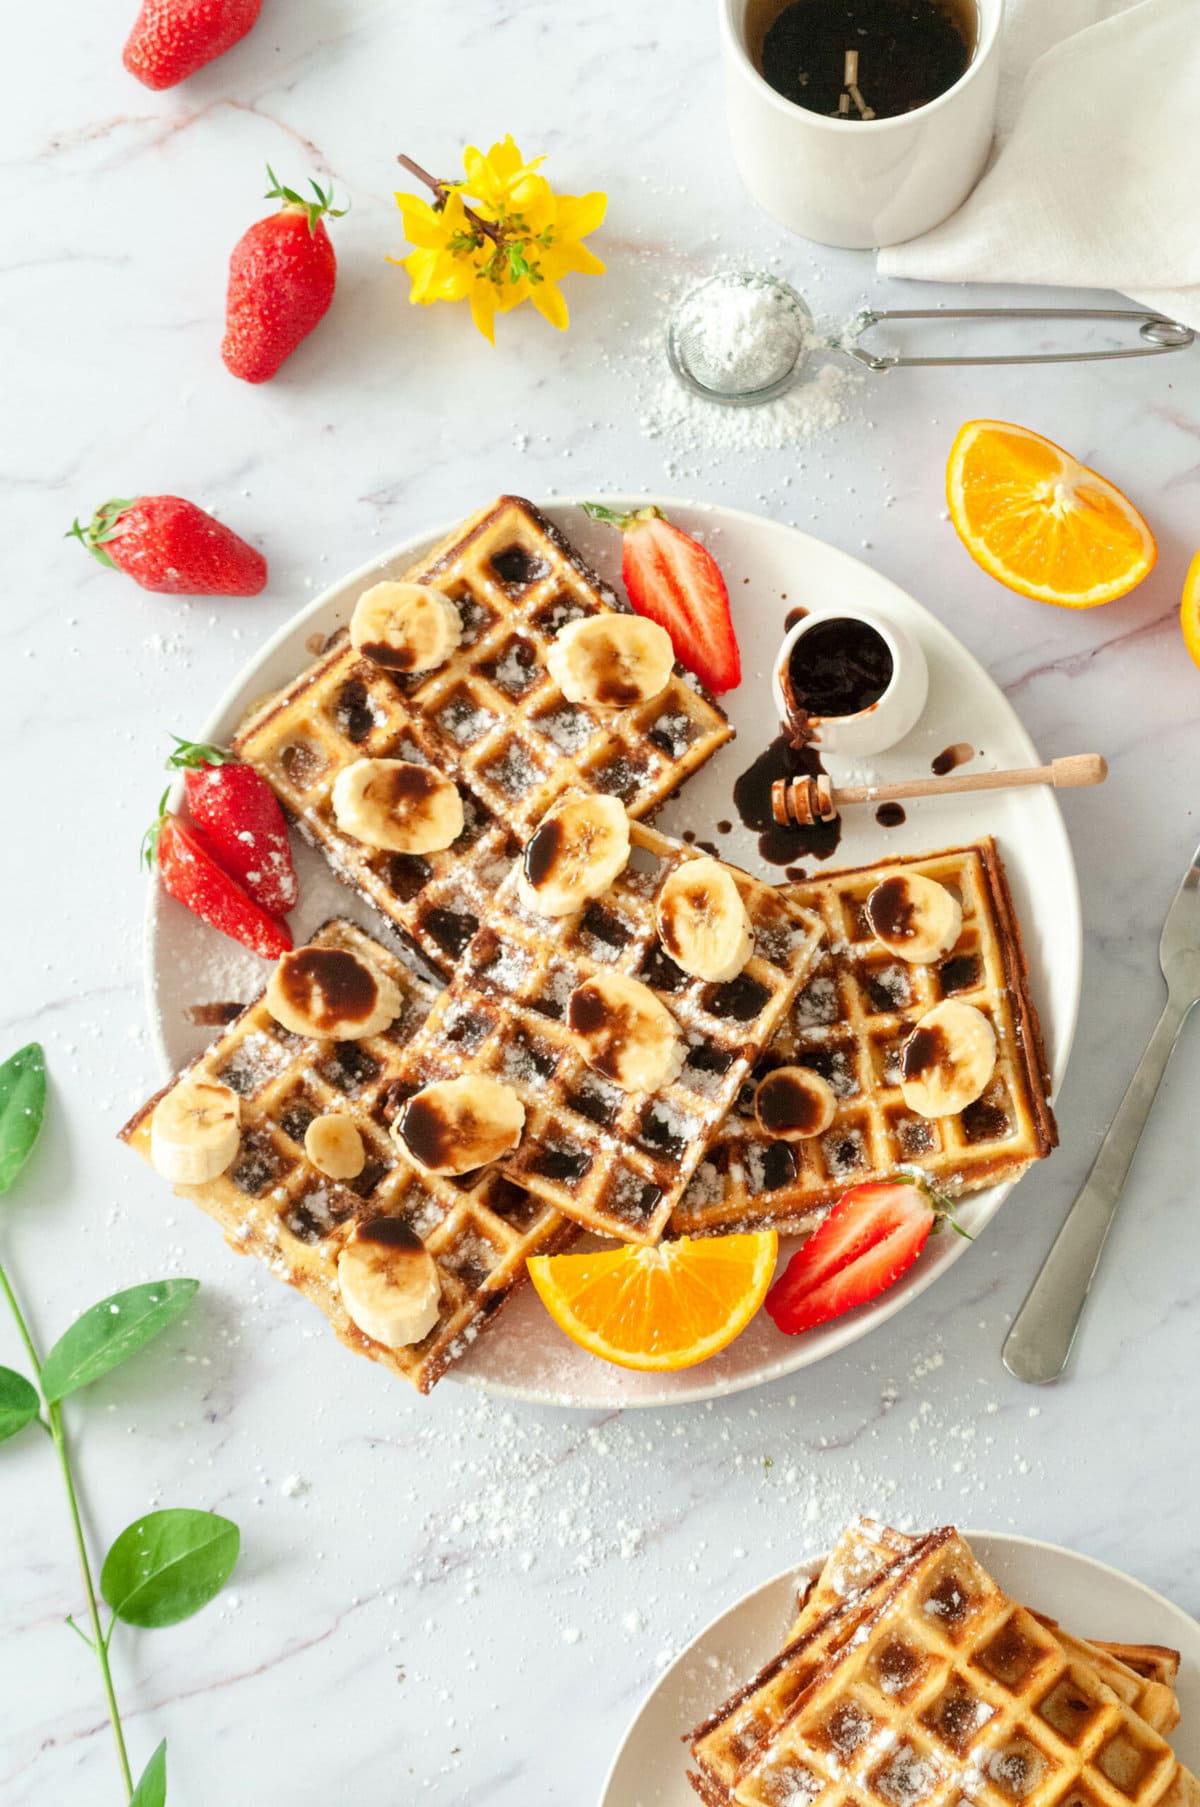 Several waffles on a plate with melted chocolate, hot chocolate, strawberries and orange wedges.